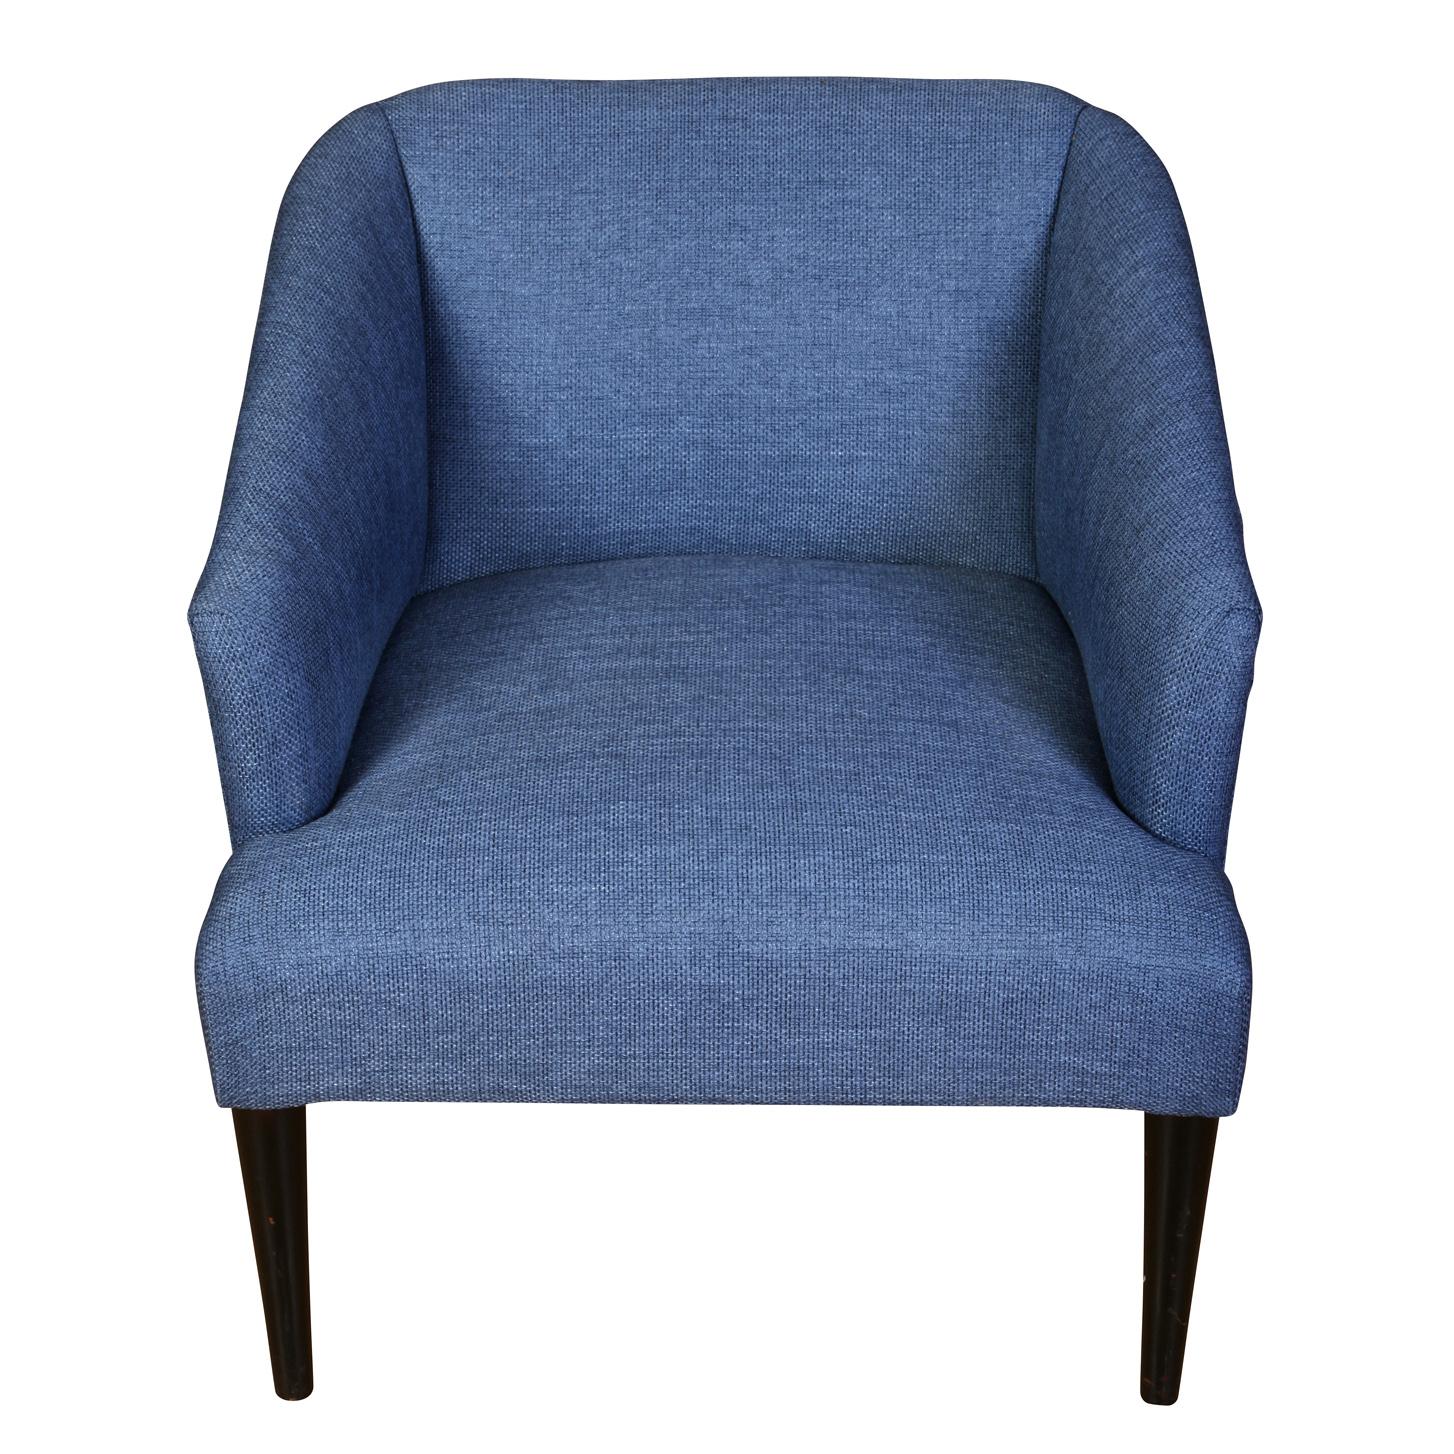 A vintage pair of modern blue upholstered lounge chairs with narrow dark wood legs.